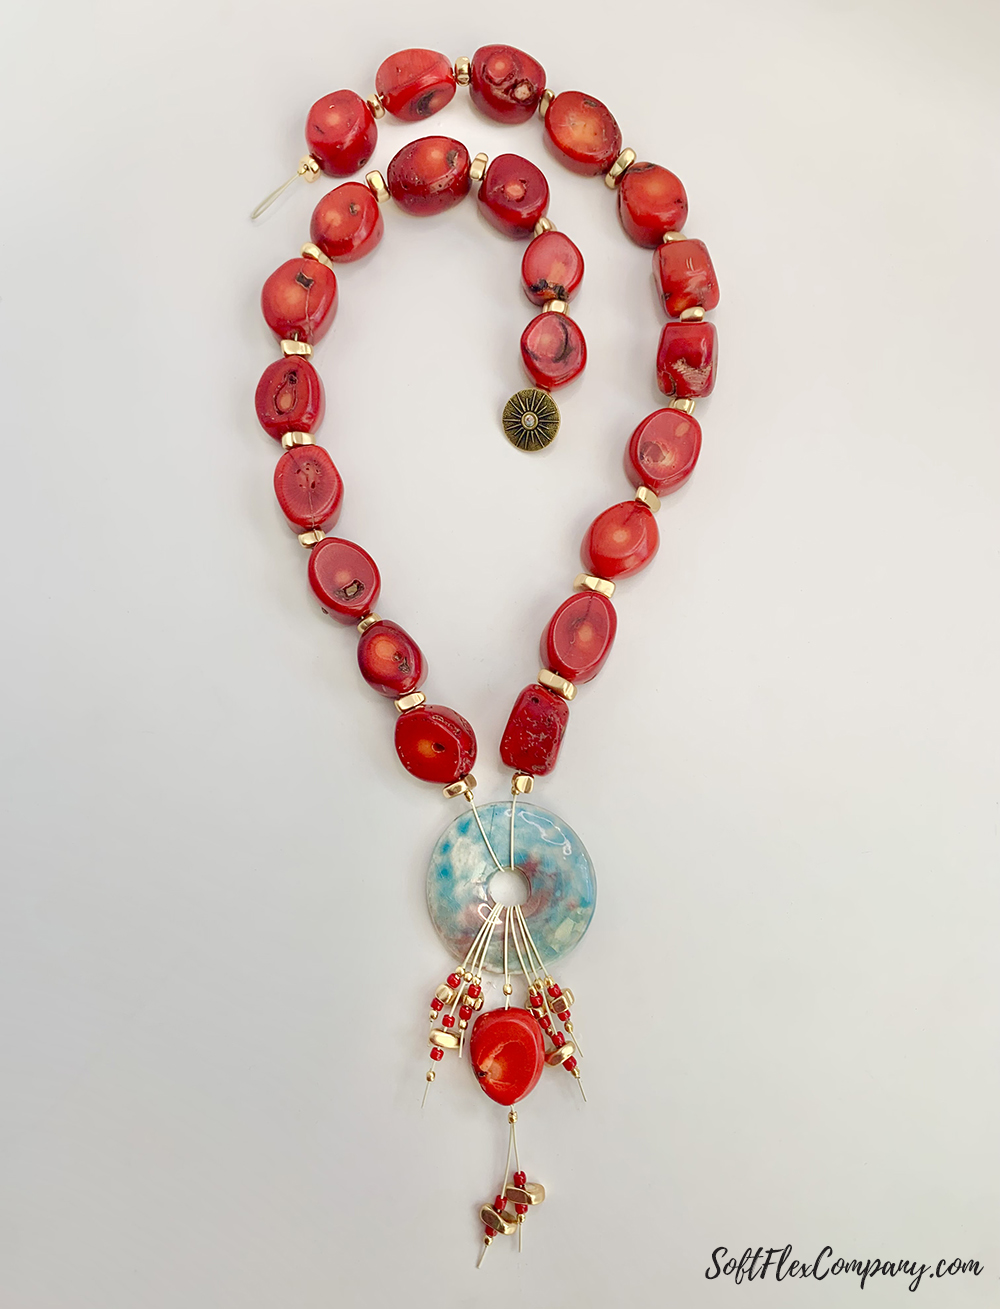 Coral Bead & Cermaic Donut Pendant Necklace by Sara Oehler